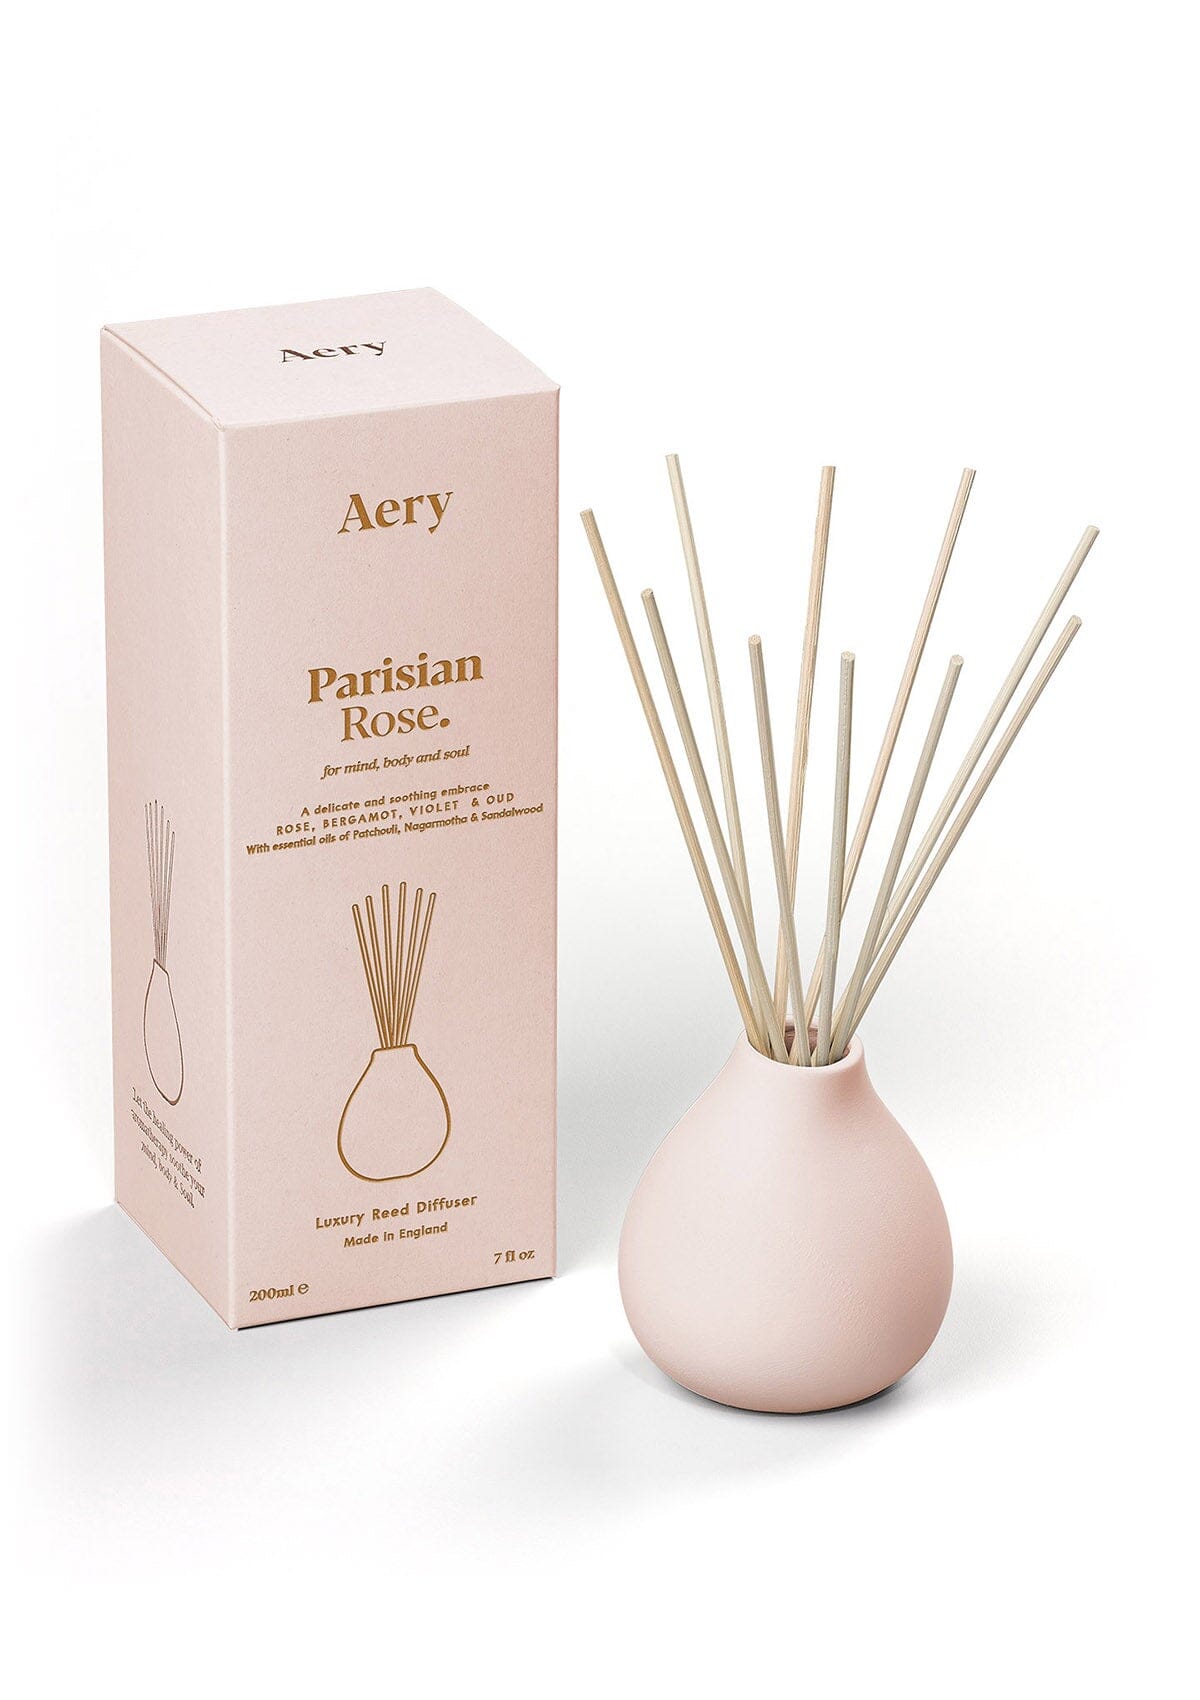 Pale pink Parisian Rose diffuser displayed next to product packaging by Aery on white background 